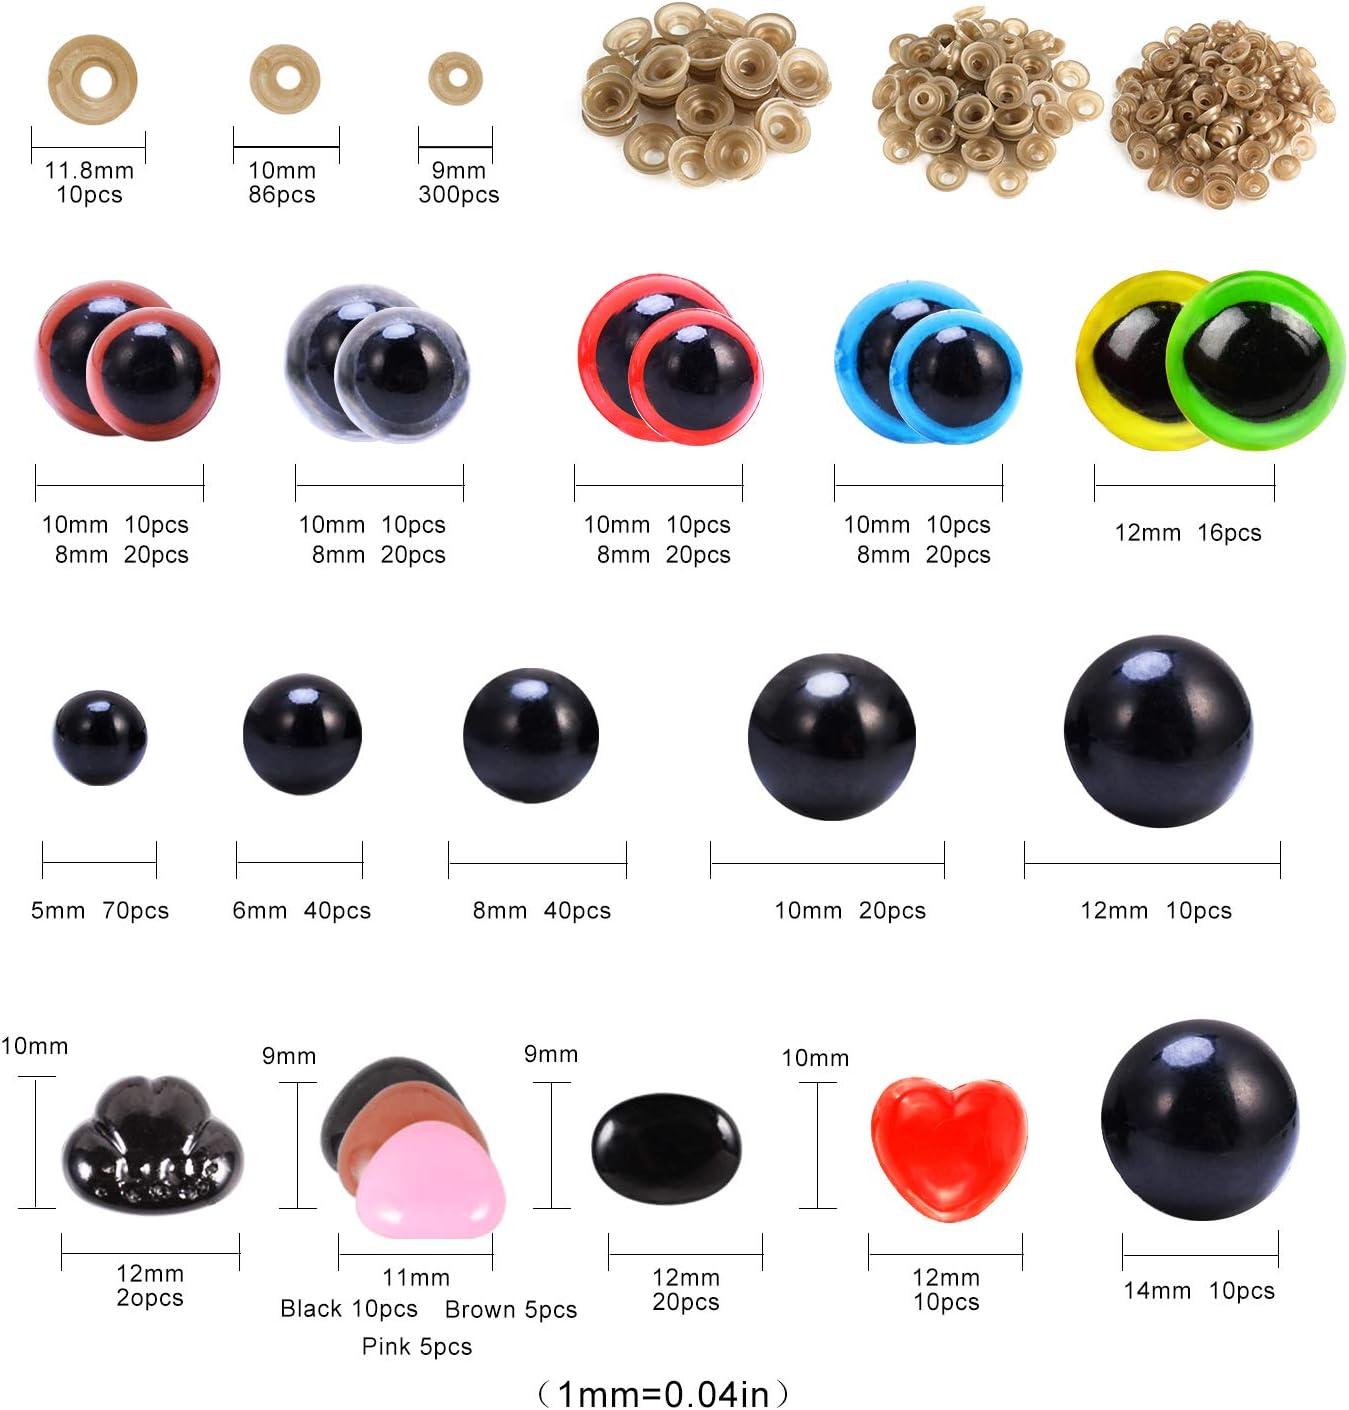 Safety Eyes and Noses 792PCS Colorful Safety Eyes for Amigurumi with  Washers for Crafts/Crochet/Stuffed Animals Multicolored